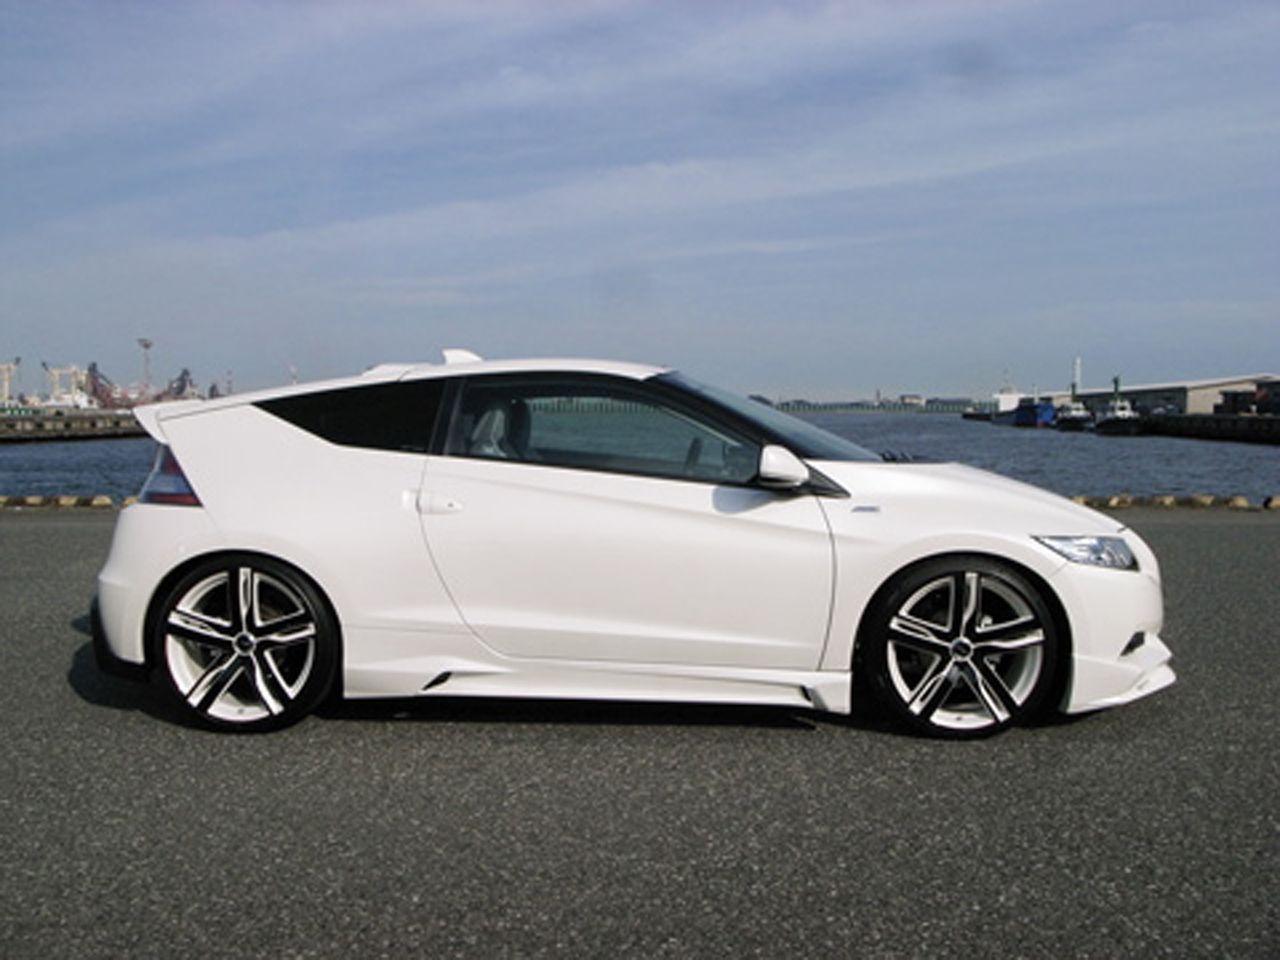 Honda Crz Wallpaper For Apple Puter Cars And The